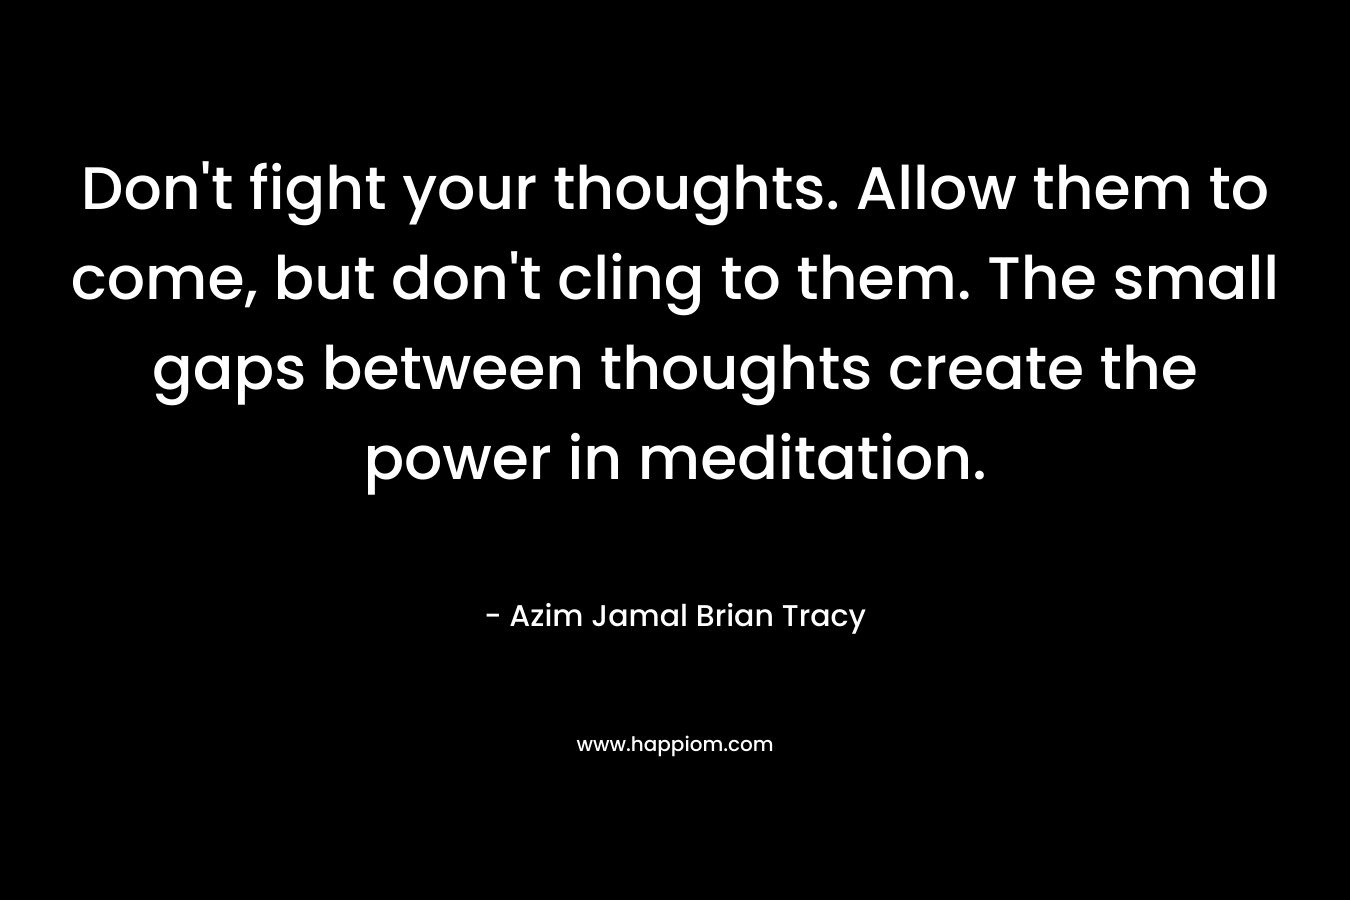 Don't fight your thoughts. Allow them to come, but don't cling to them. The small gaps between thoughts create the power in meditation.